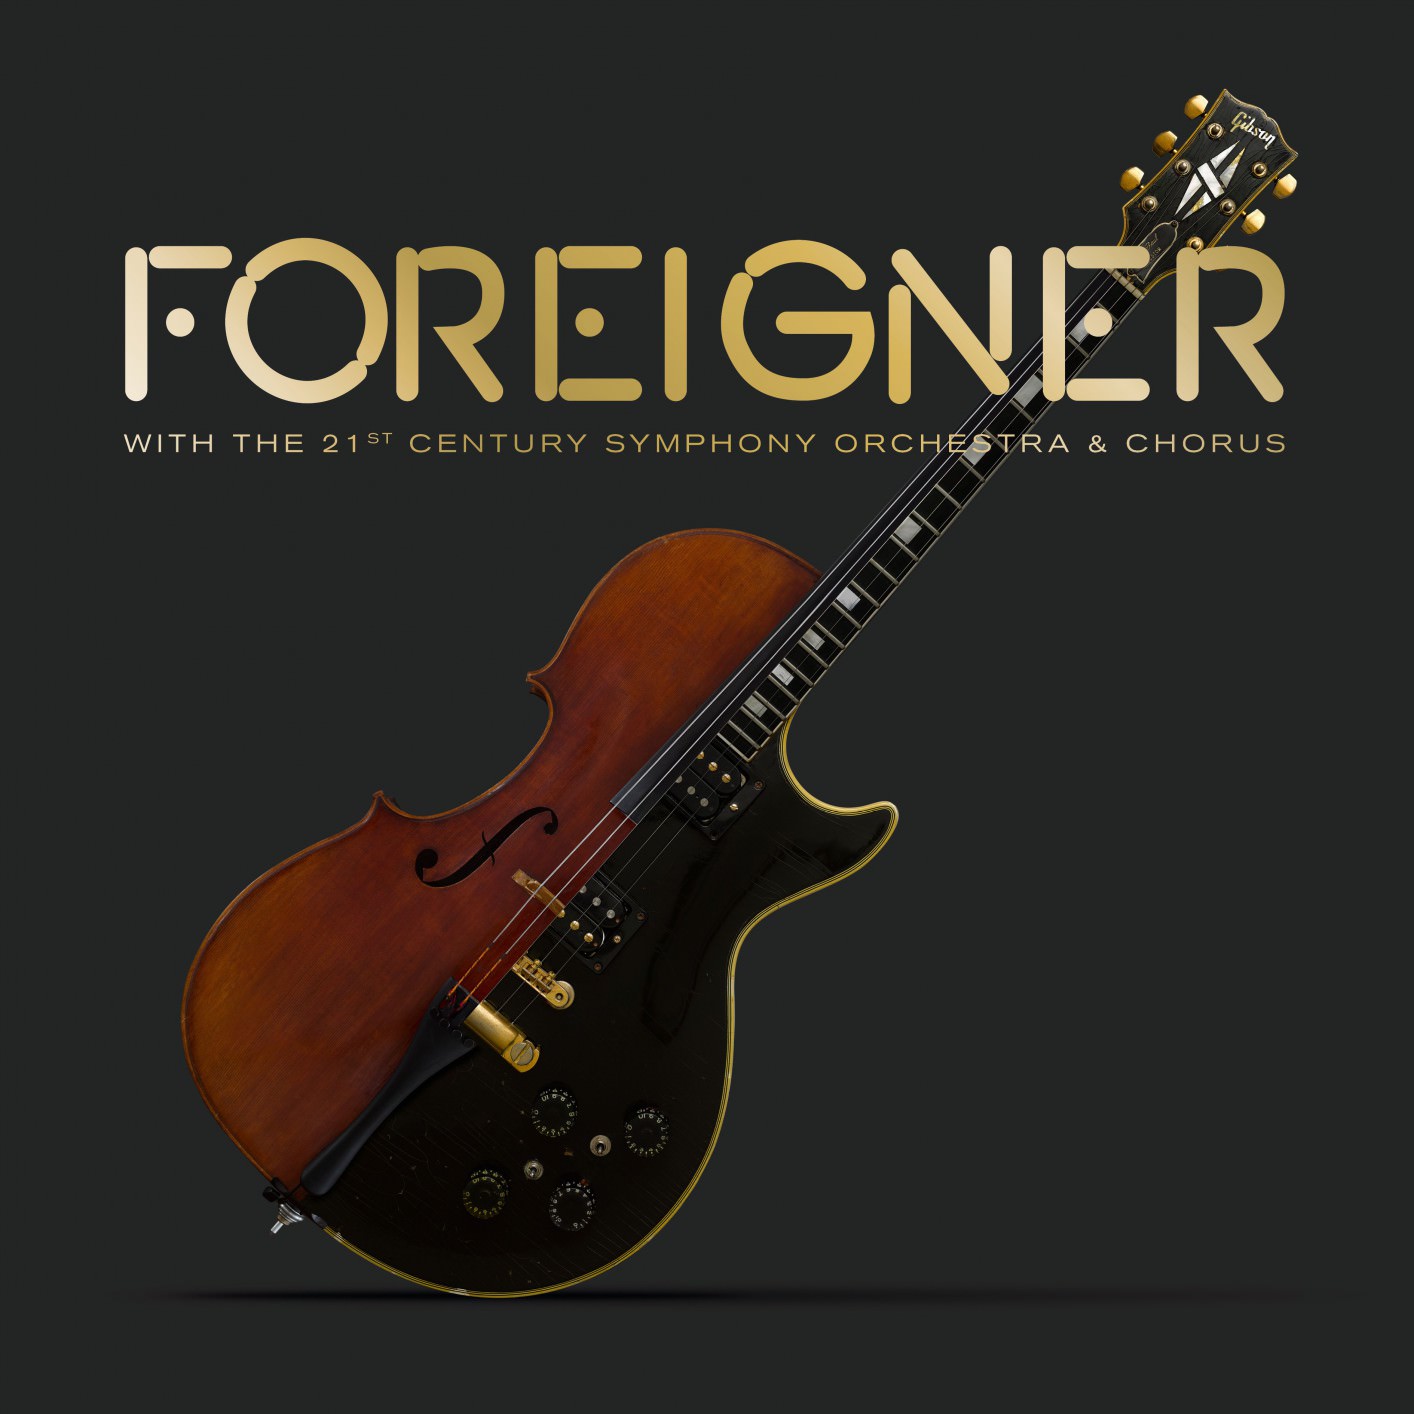 Foreigner - Foreigner with the 21st Century Symphony Orchestra & Chorus (2018) [FLAC 24bit/48kHz]